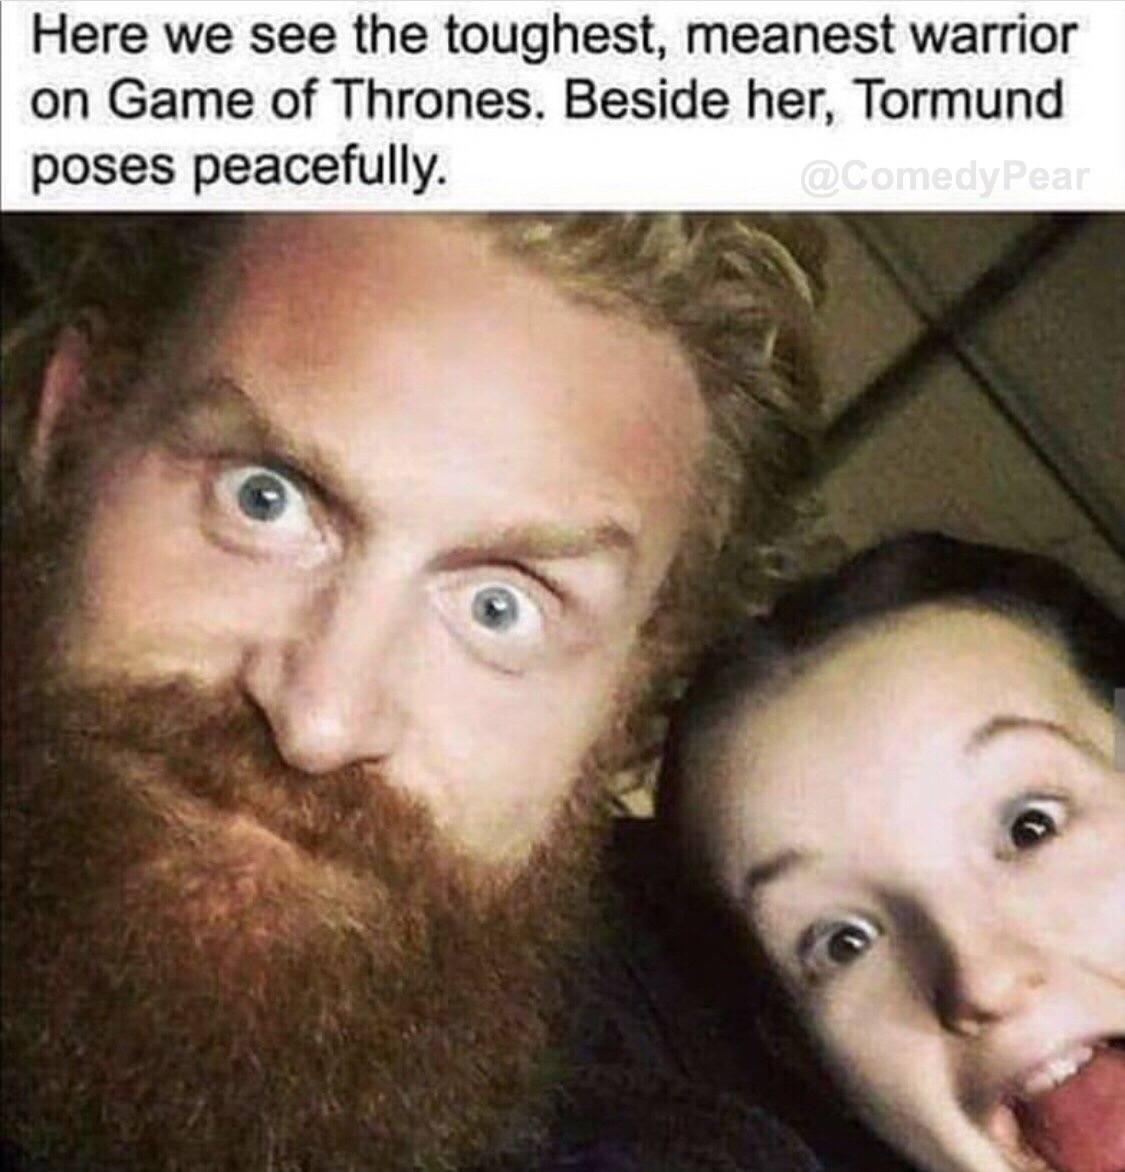 Game of Thrones behind the scenes - tormund and lyanna mormont - Here we see the toughest, meanest warrior on Game of Thrones. Beside her, Tormund poses peacefully.